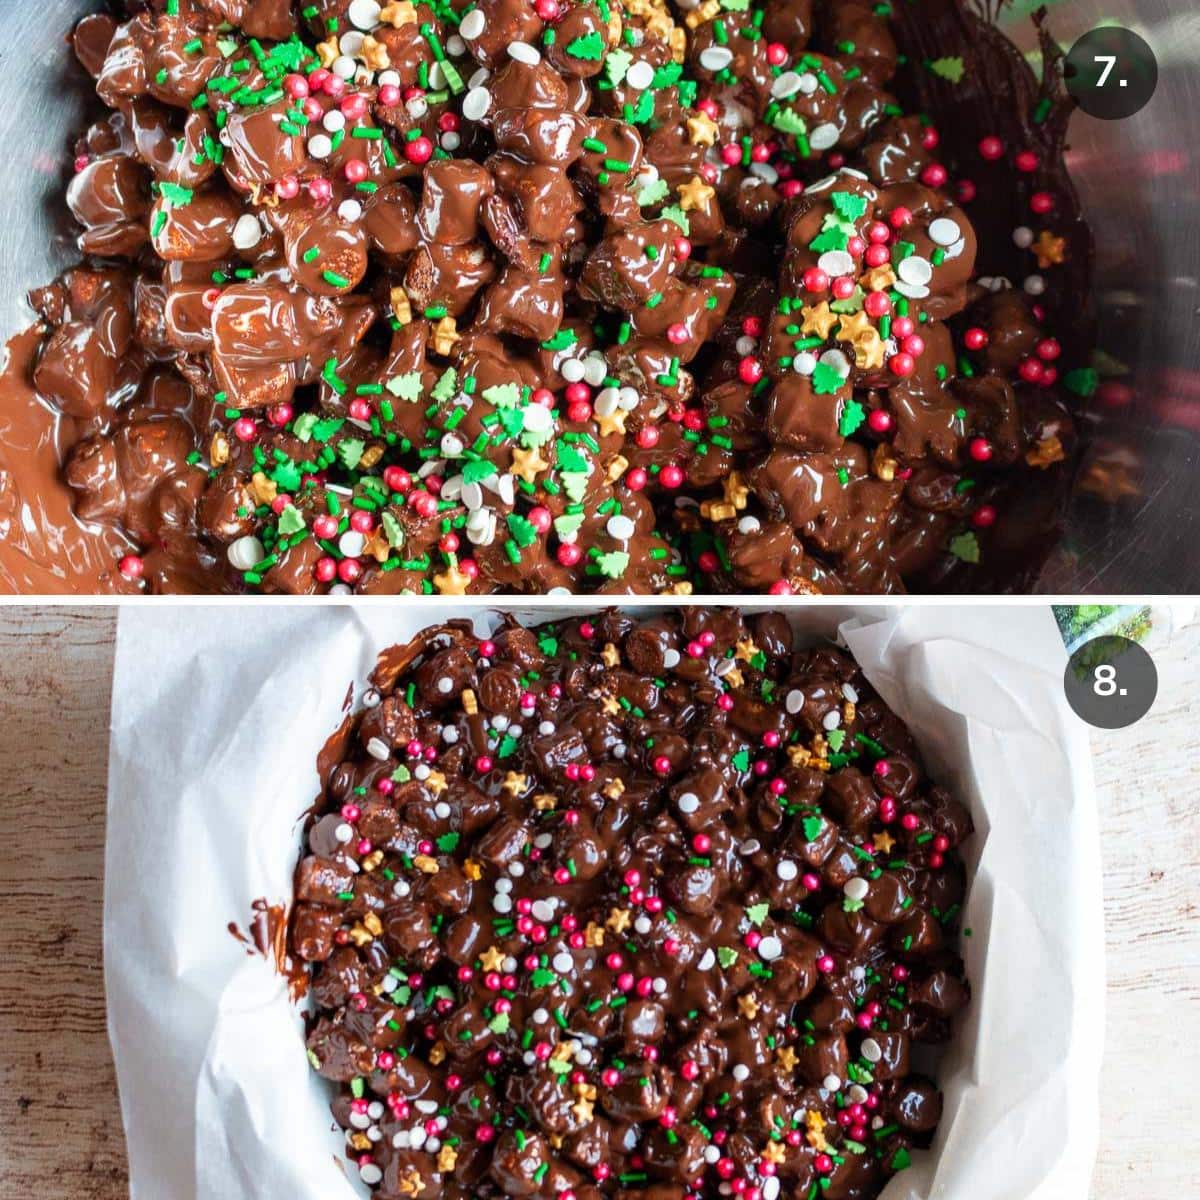 Rocky road mixed together and placed into a parchment lined baking dish. 